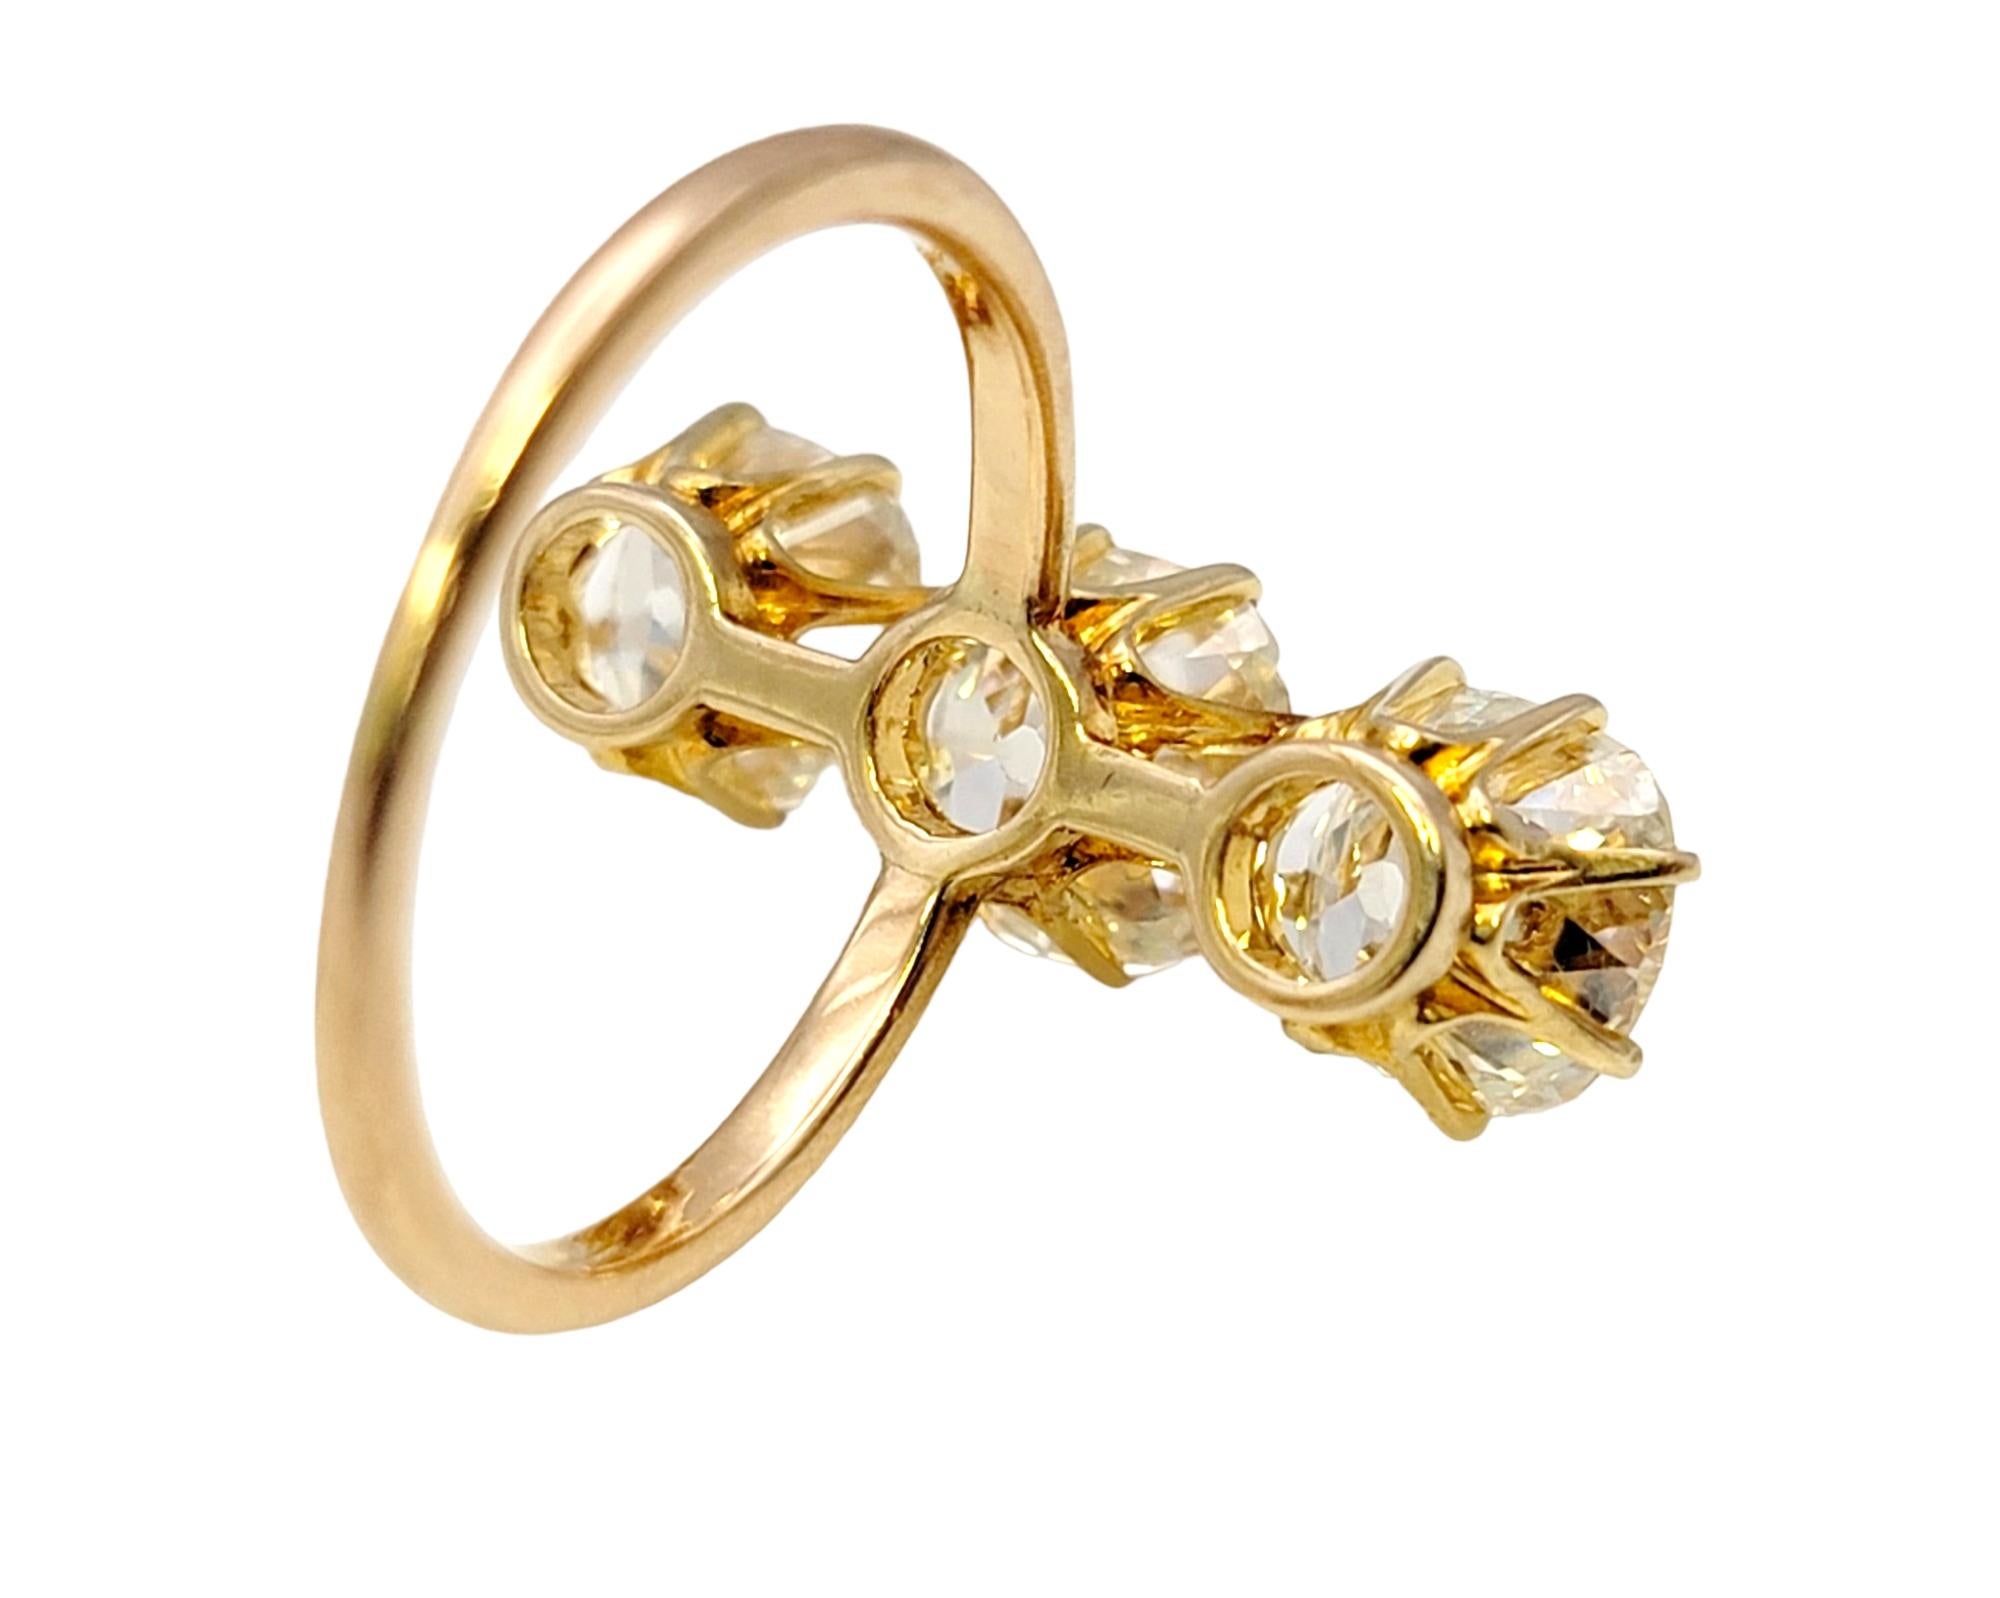 3.88 Carat Total Three-Stone Old Mine Cut Diamond Elongated 14 Karat Gold Ring In Good Condition For Sale In Scottsdale, AZ